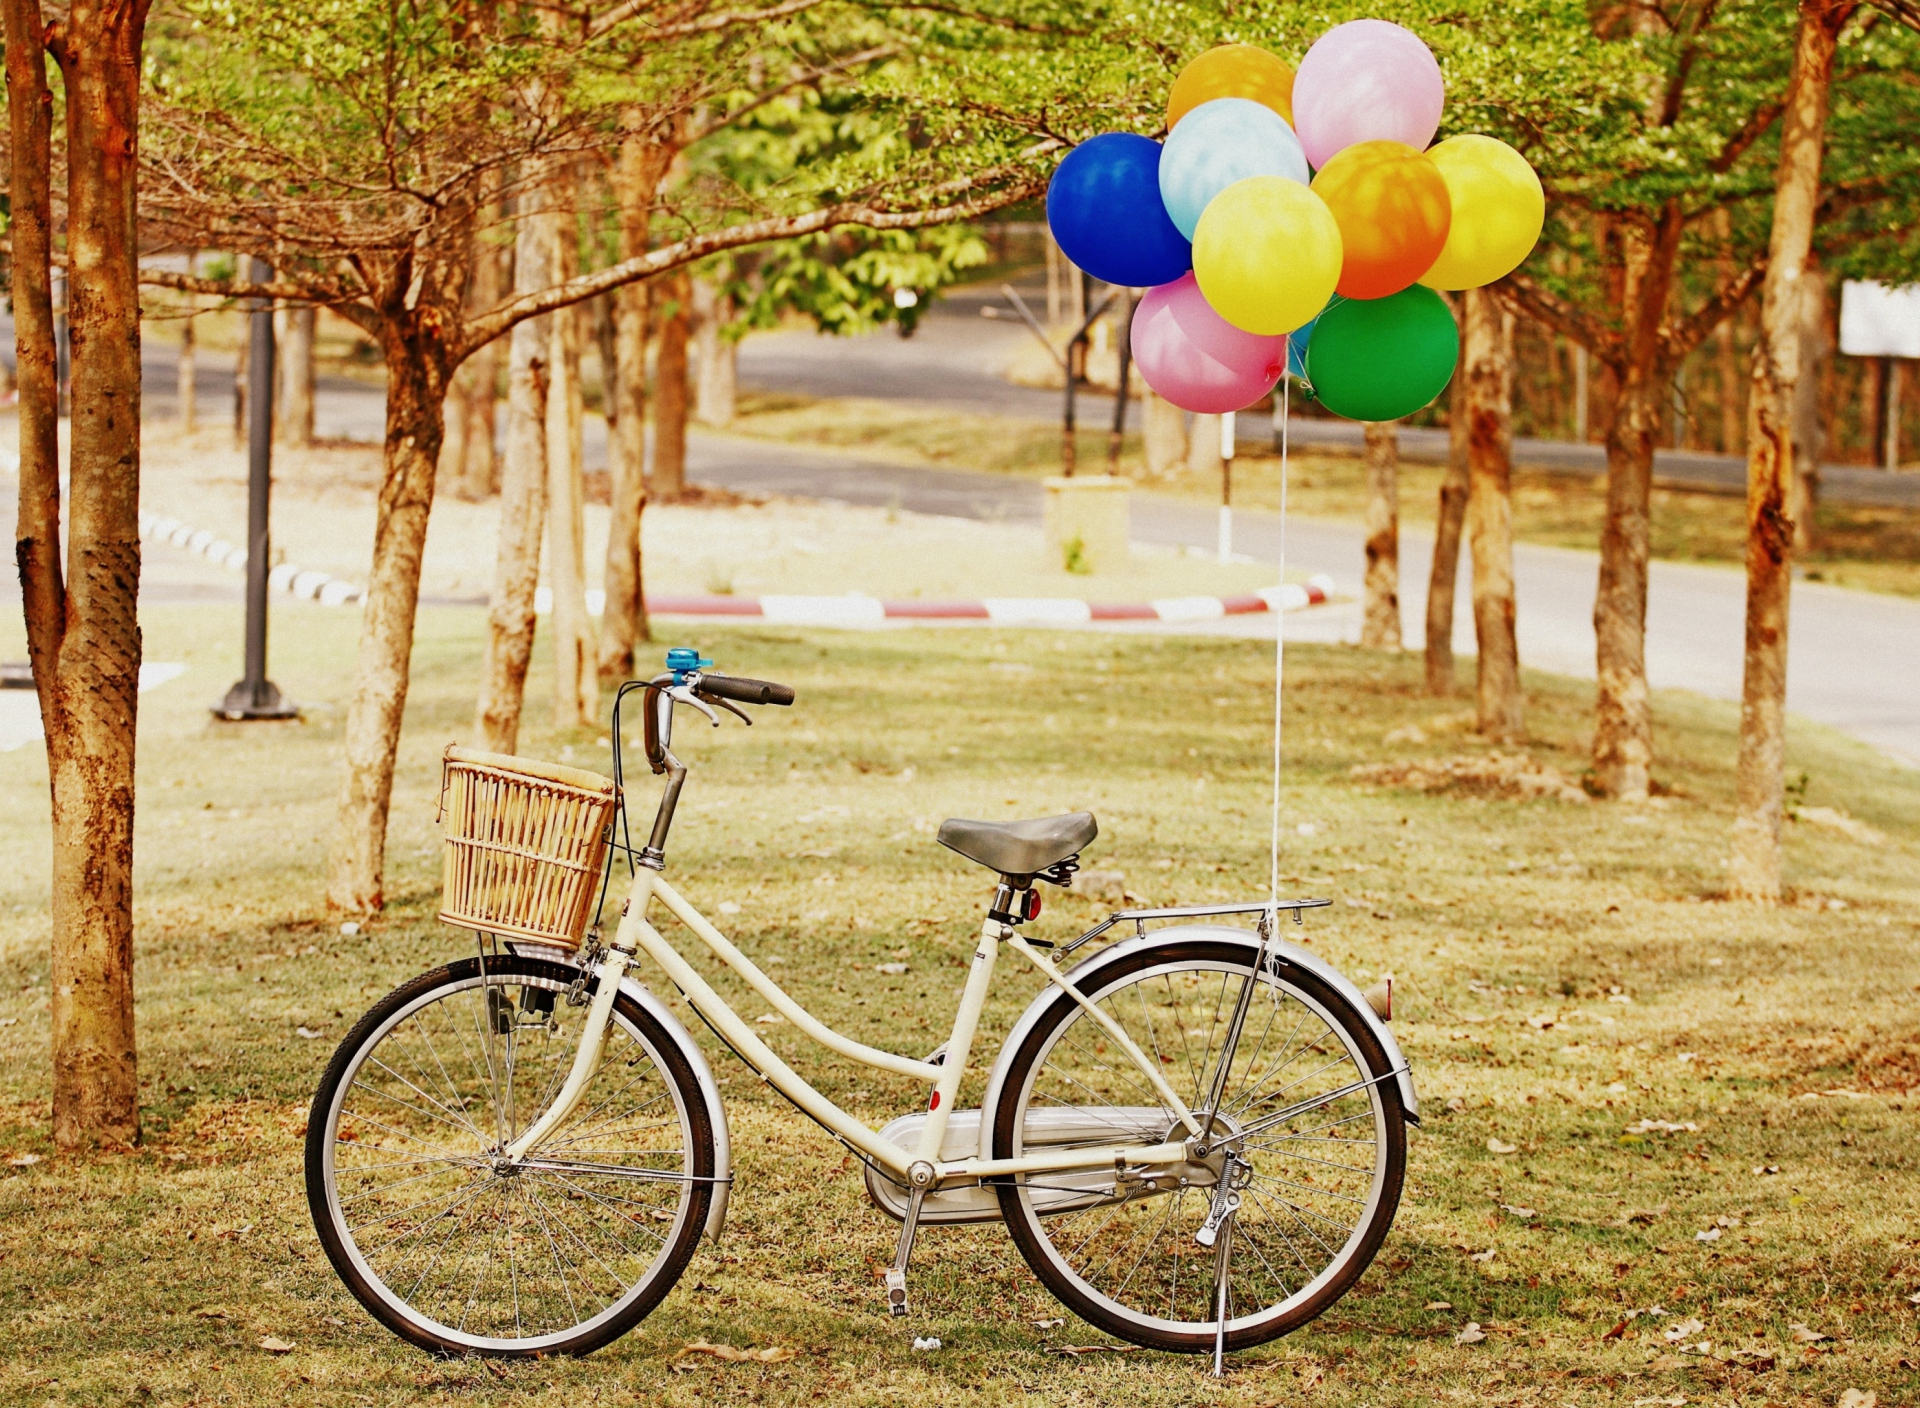 Party Bicycle wallpaper 1920x1408